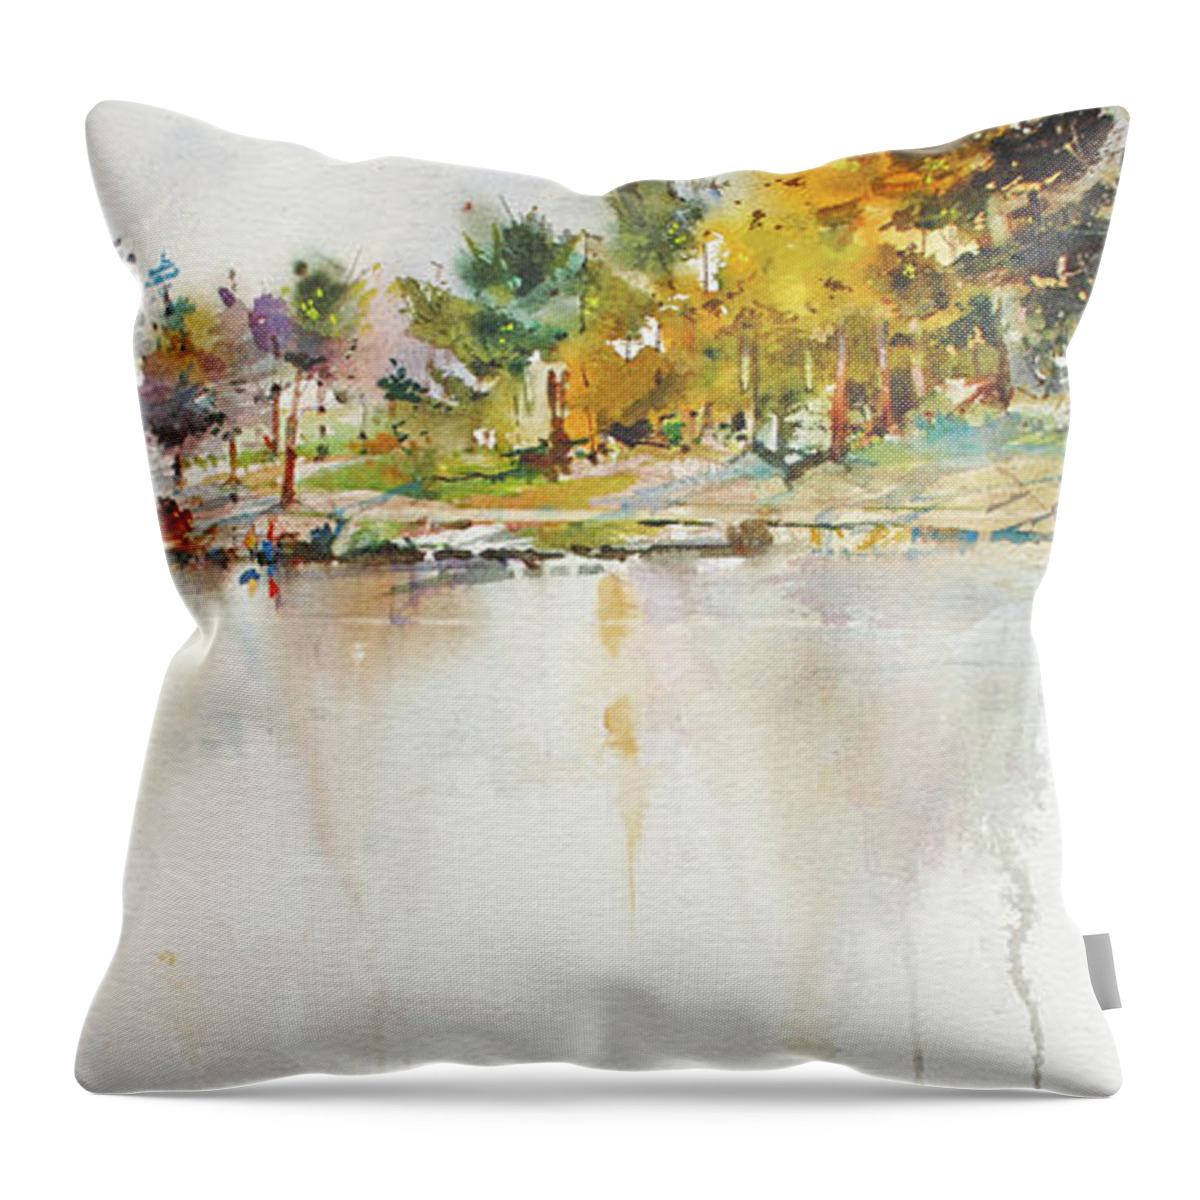 New England Scenes Throw Pillow featuring the painting Across the Pond by P Anthony Visco